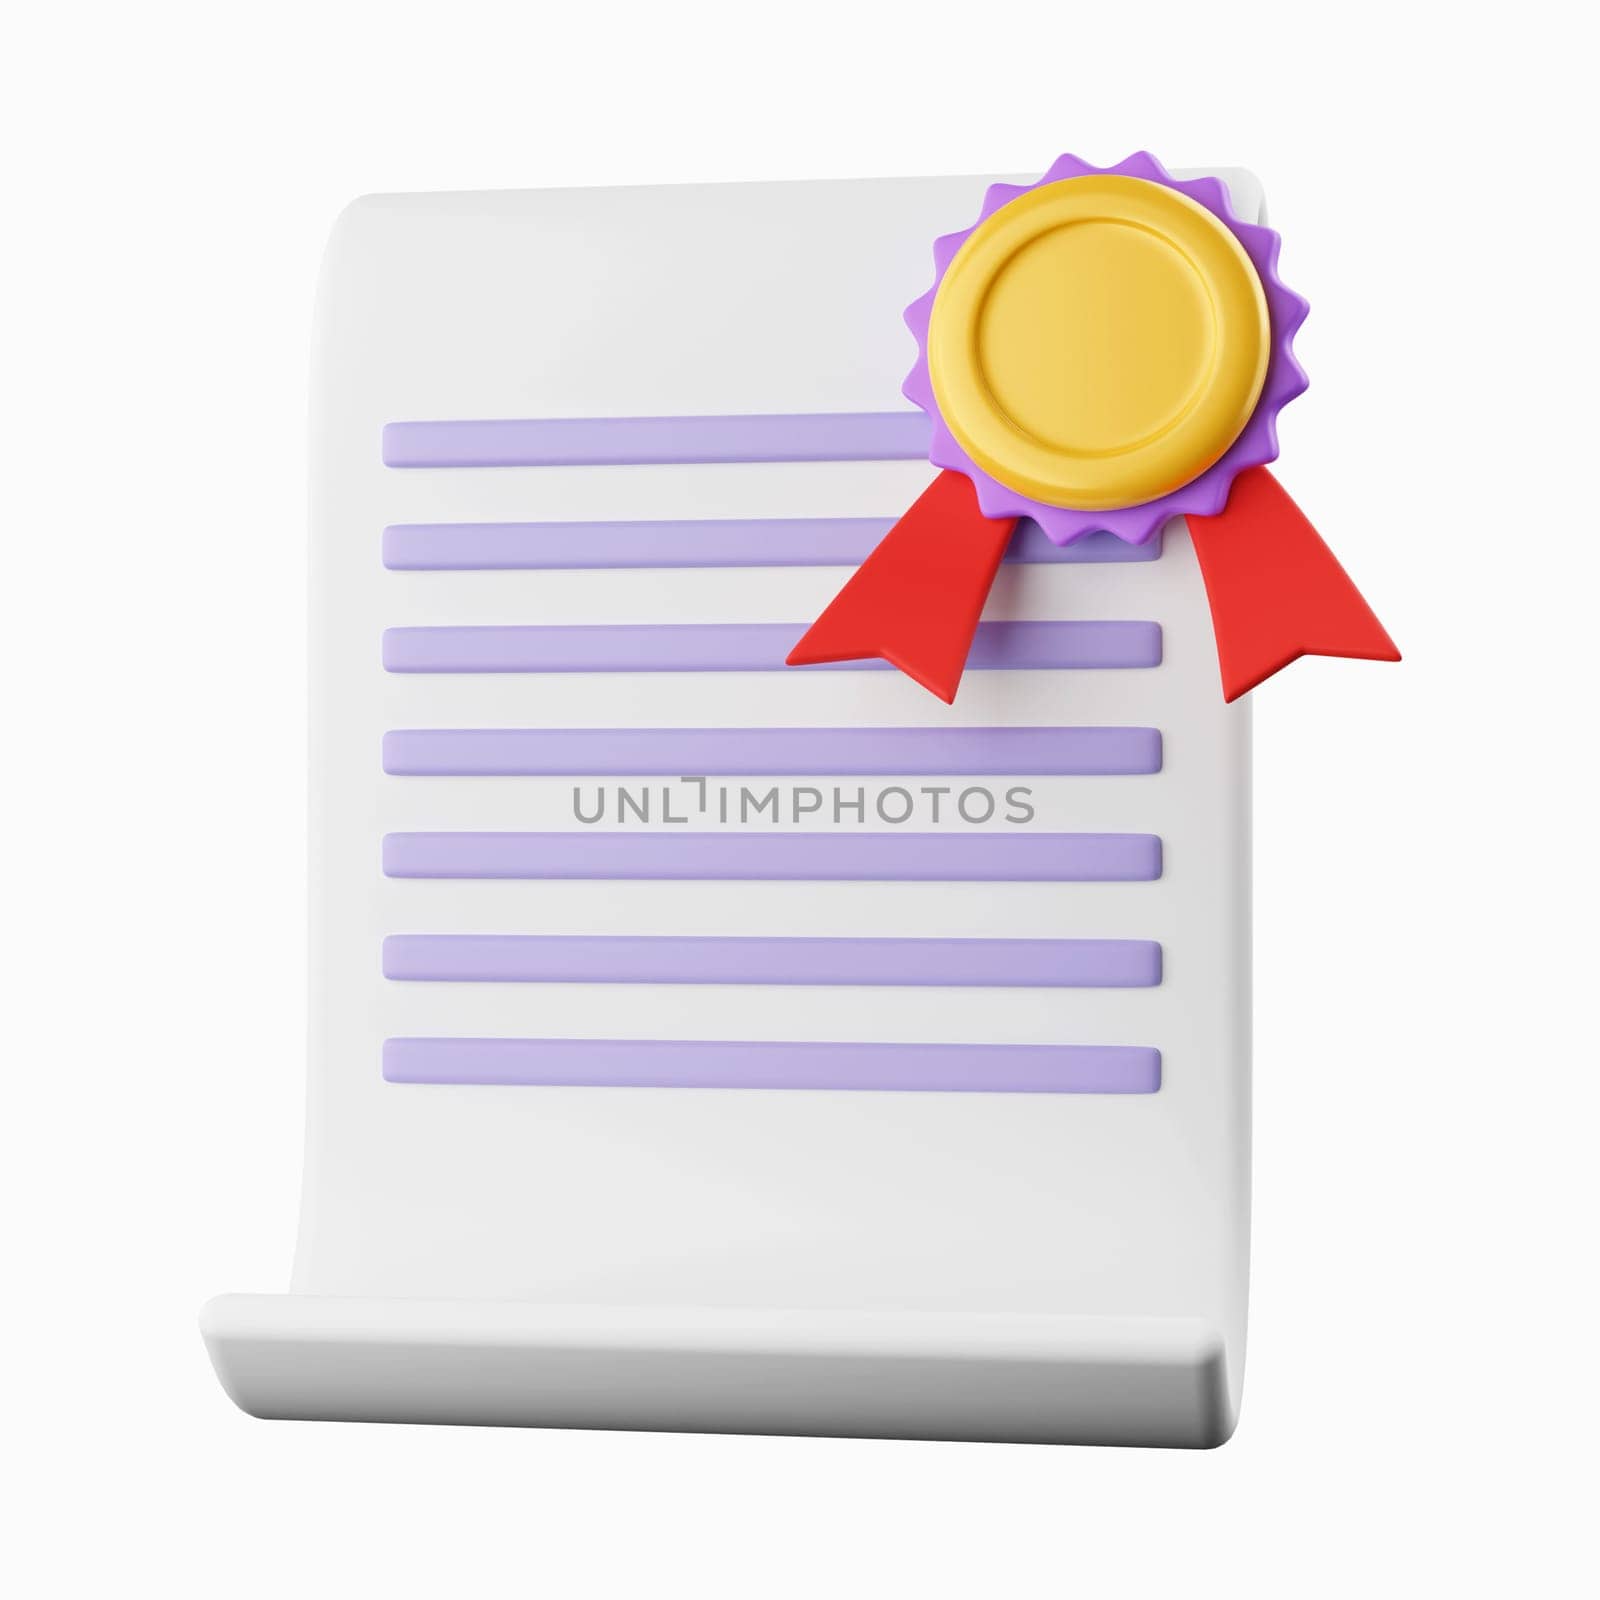 3d Certificate. Achievement, award, grant, diploma concepts. isolated on background, icon symbol clipping path. 3d render illustration by meepiangraphic